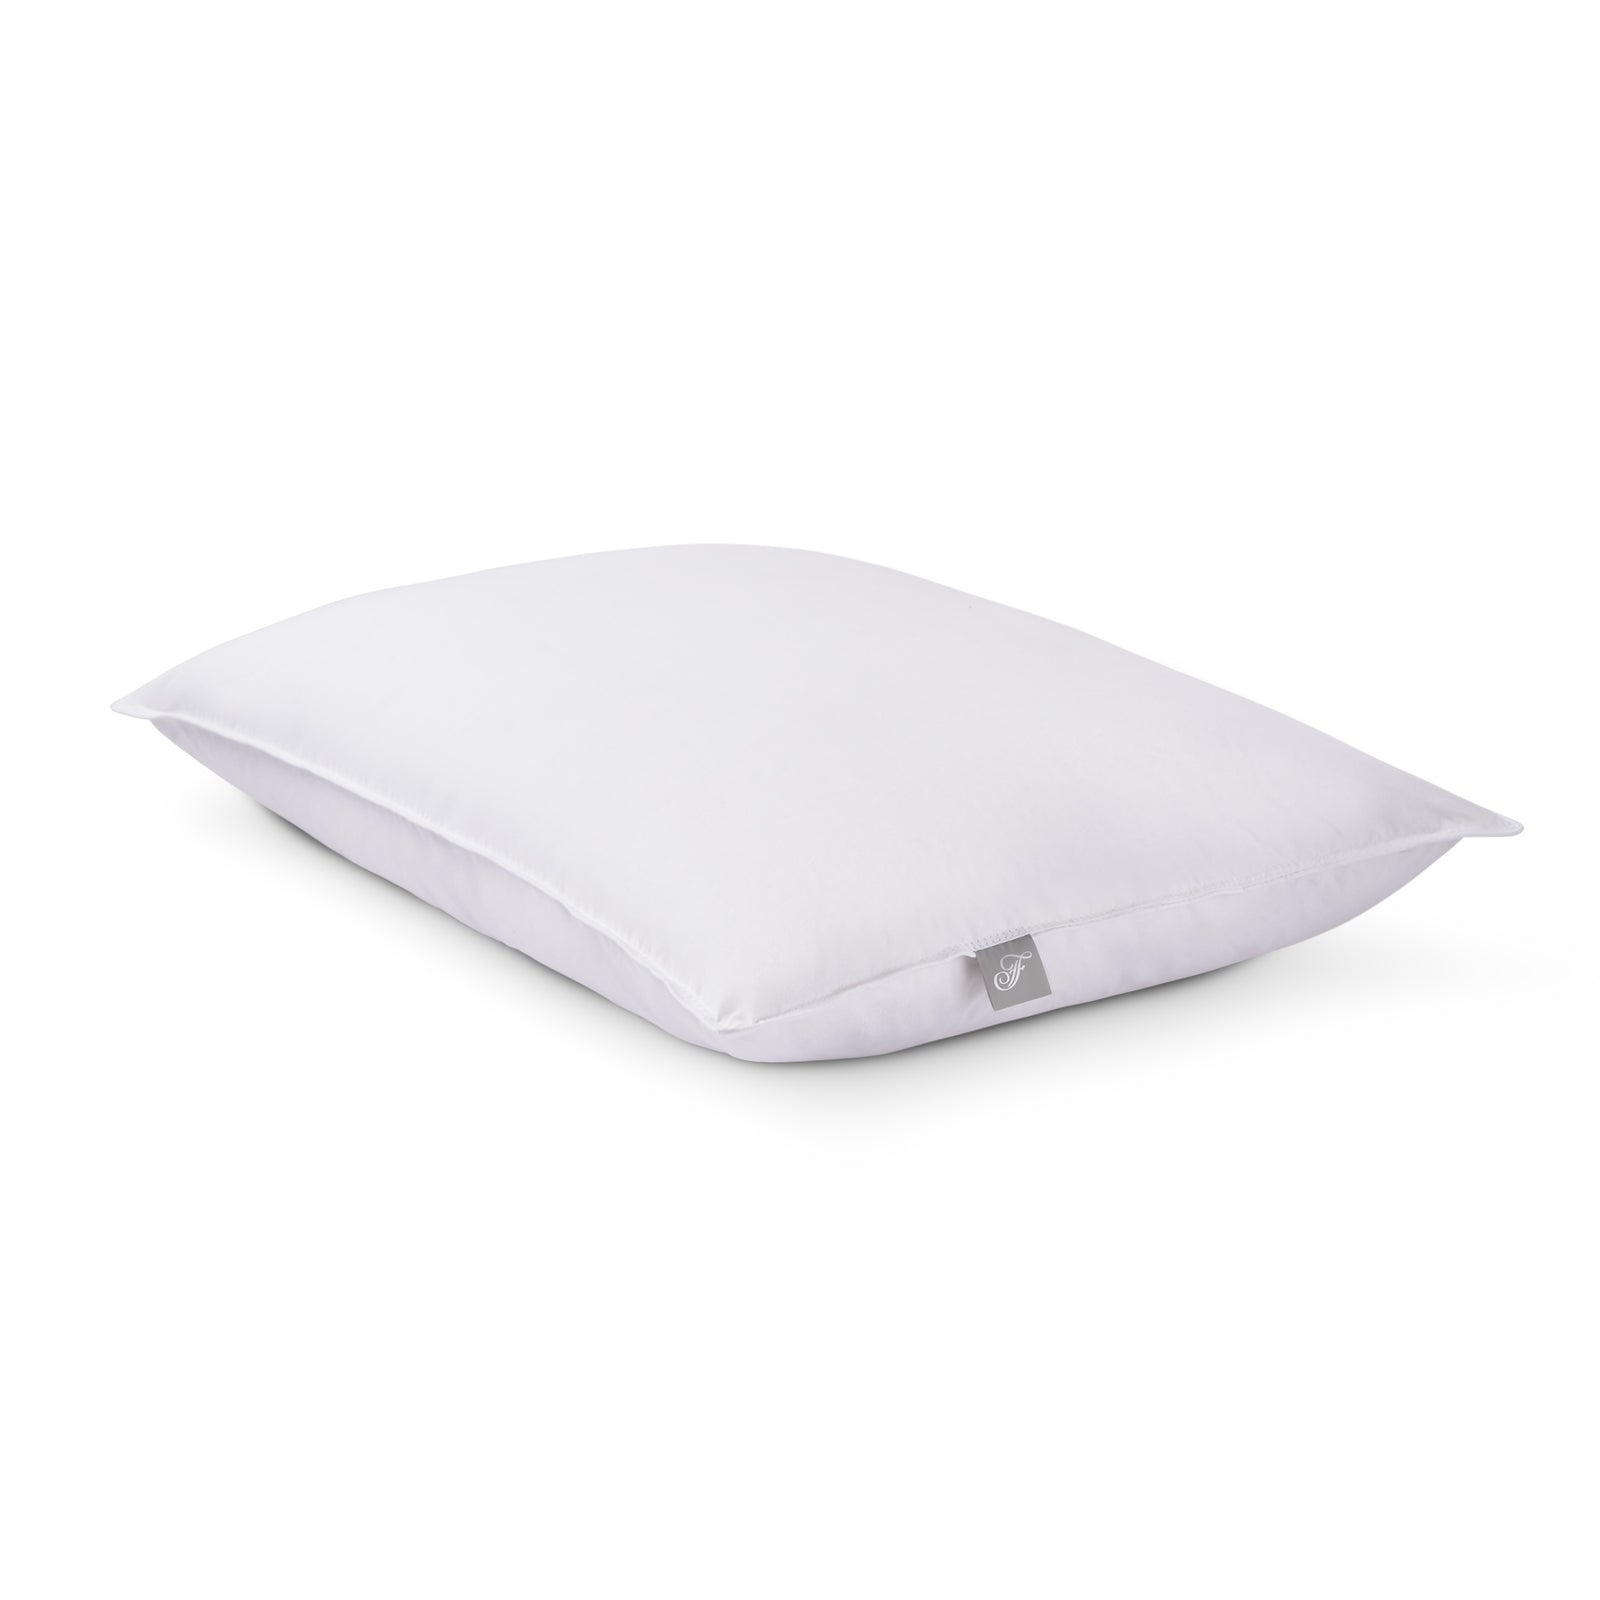 Drift Synthetic Fill Pillows - Hotel quality pillows made in the